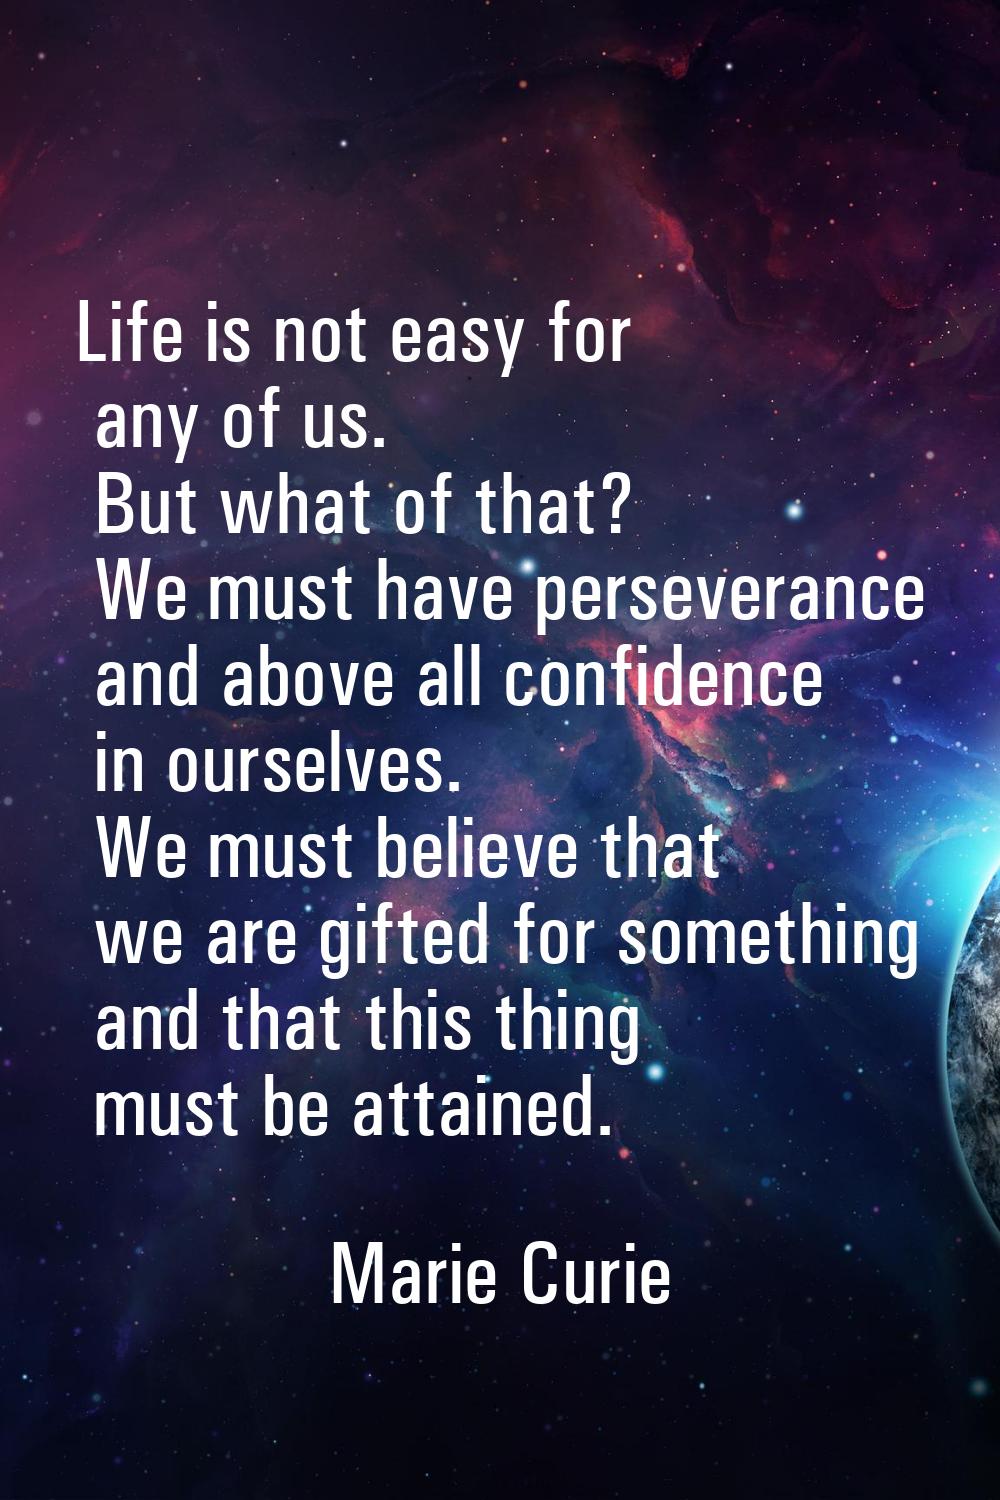 Life is not easy for any of us. But what of that? We must have perseverance and above all confidenc